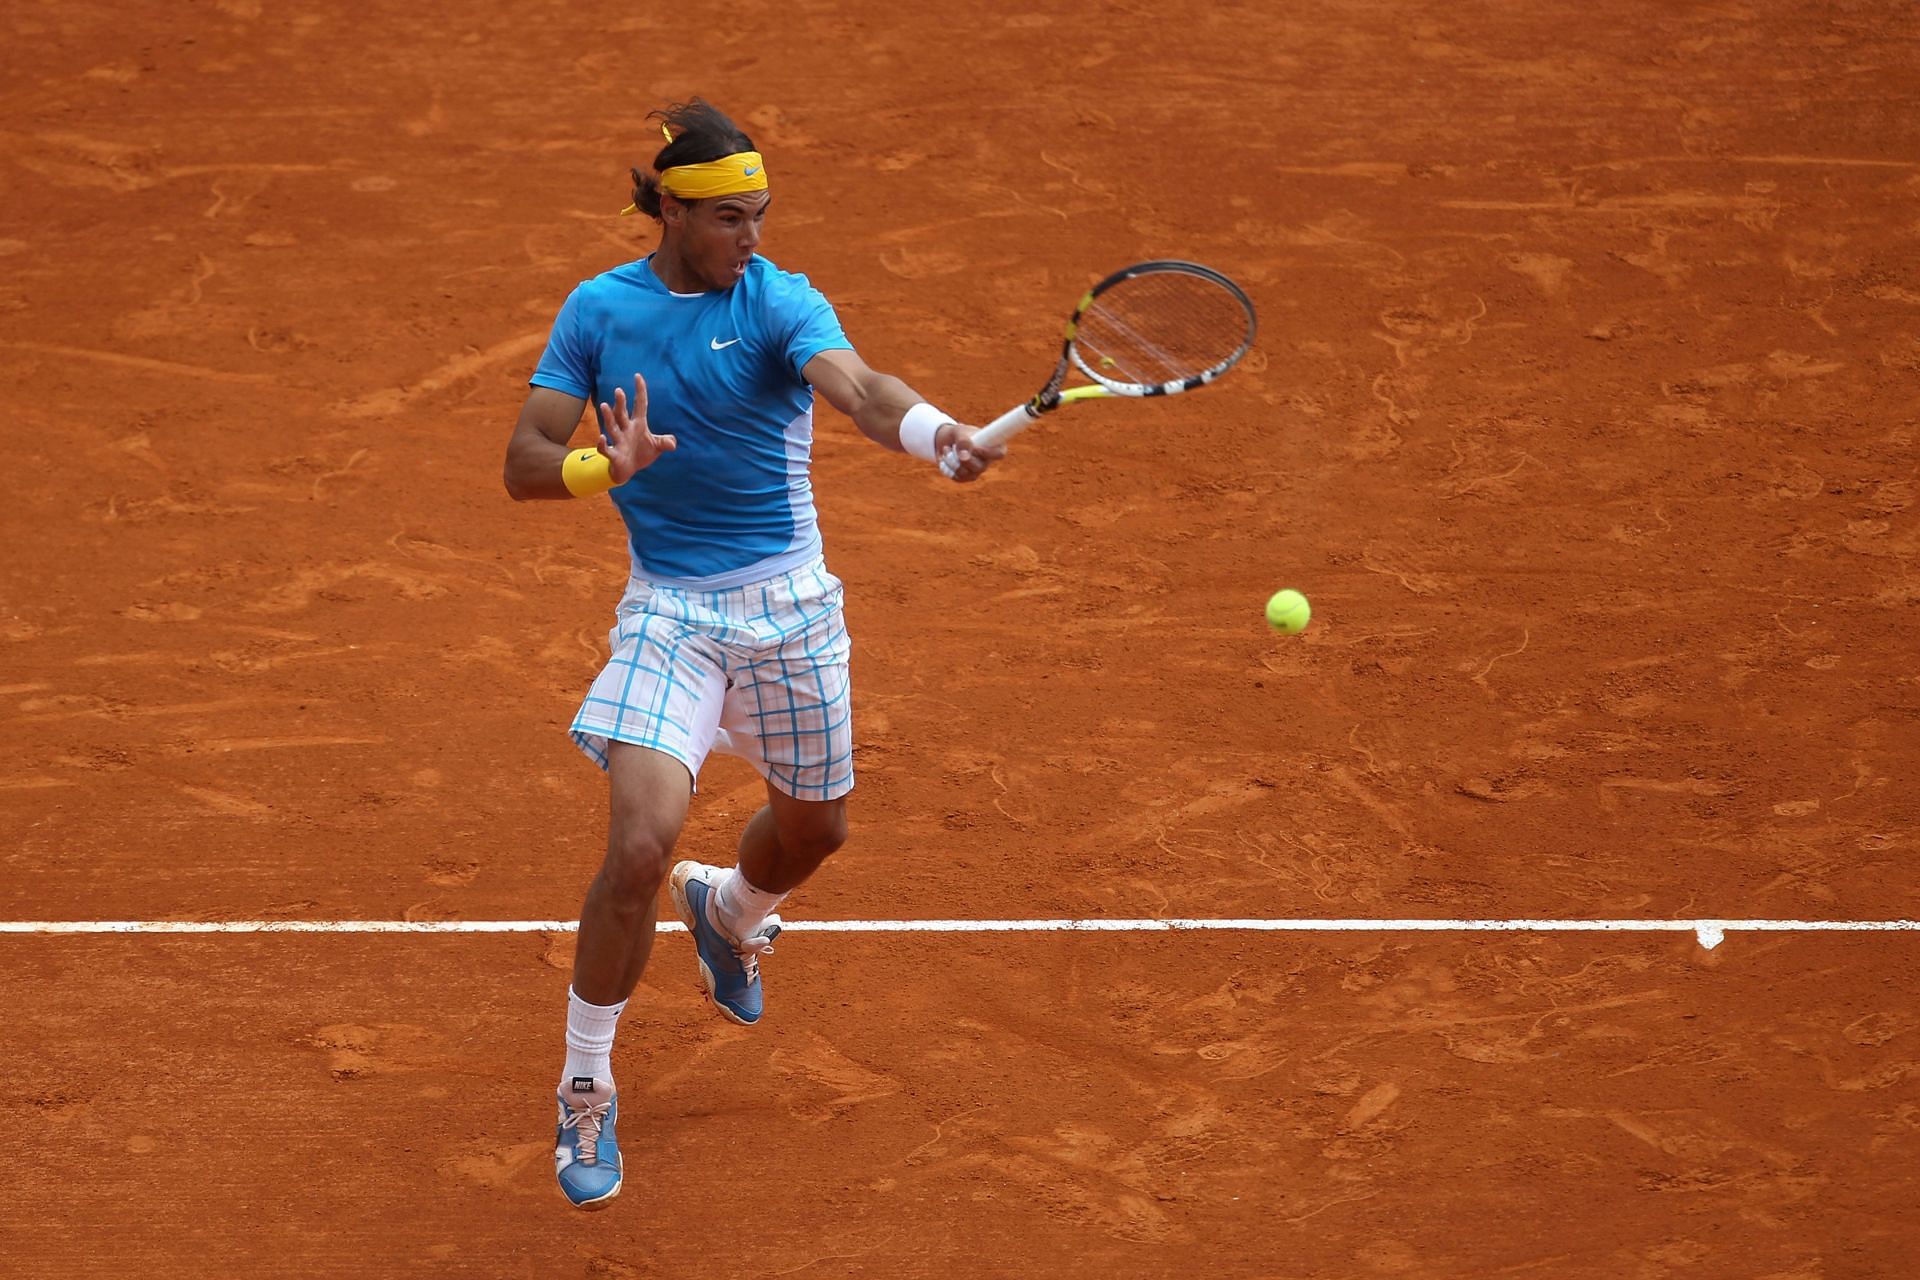 Rafael Nadal attempted to win his fourth clay title in 2007 at the Hamburg Masters